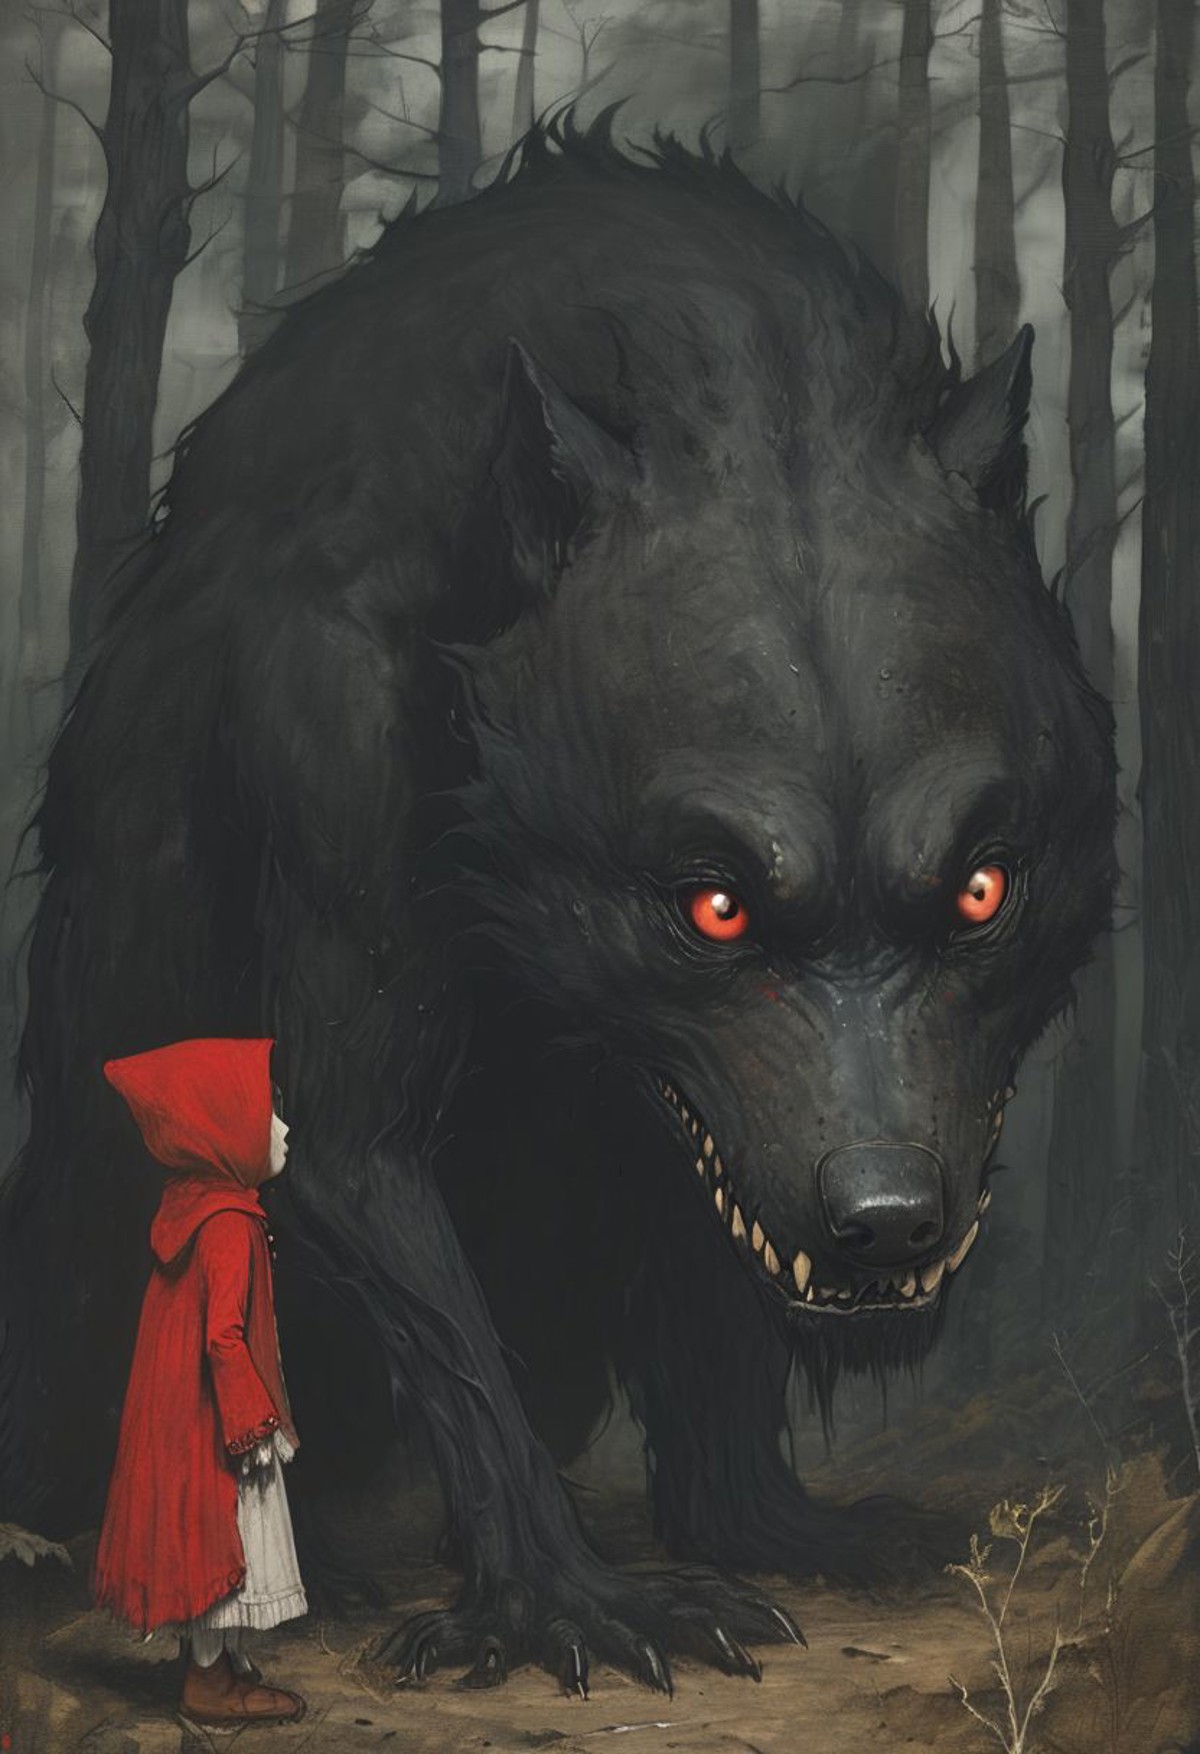 A large, black wolf with glowing eyes standing in a dark forest, next to a small figure wearing a red hooded cloak